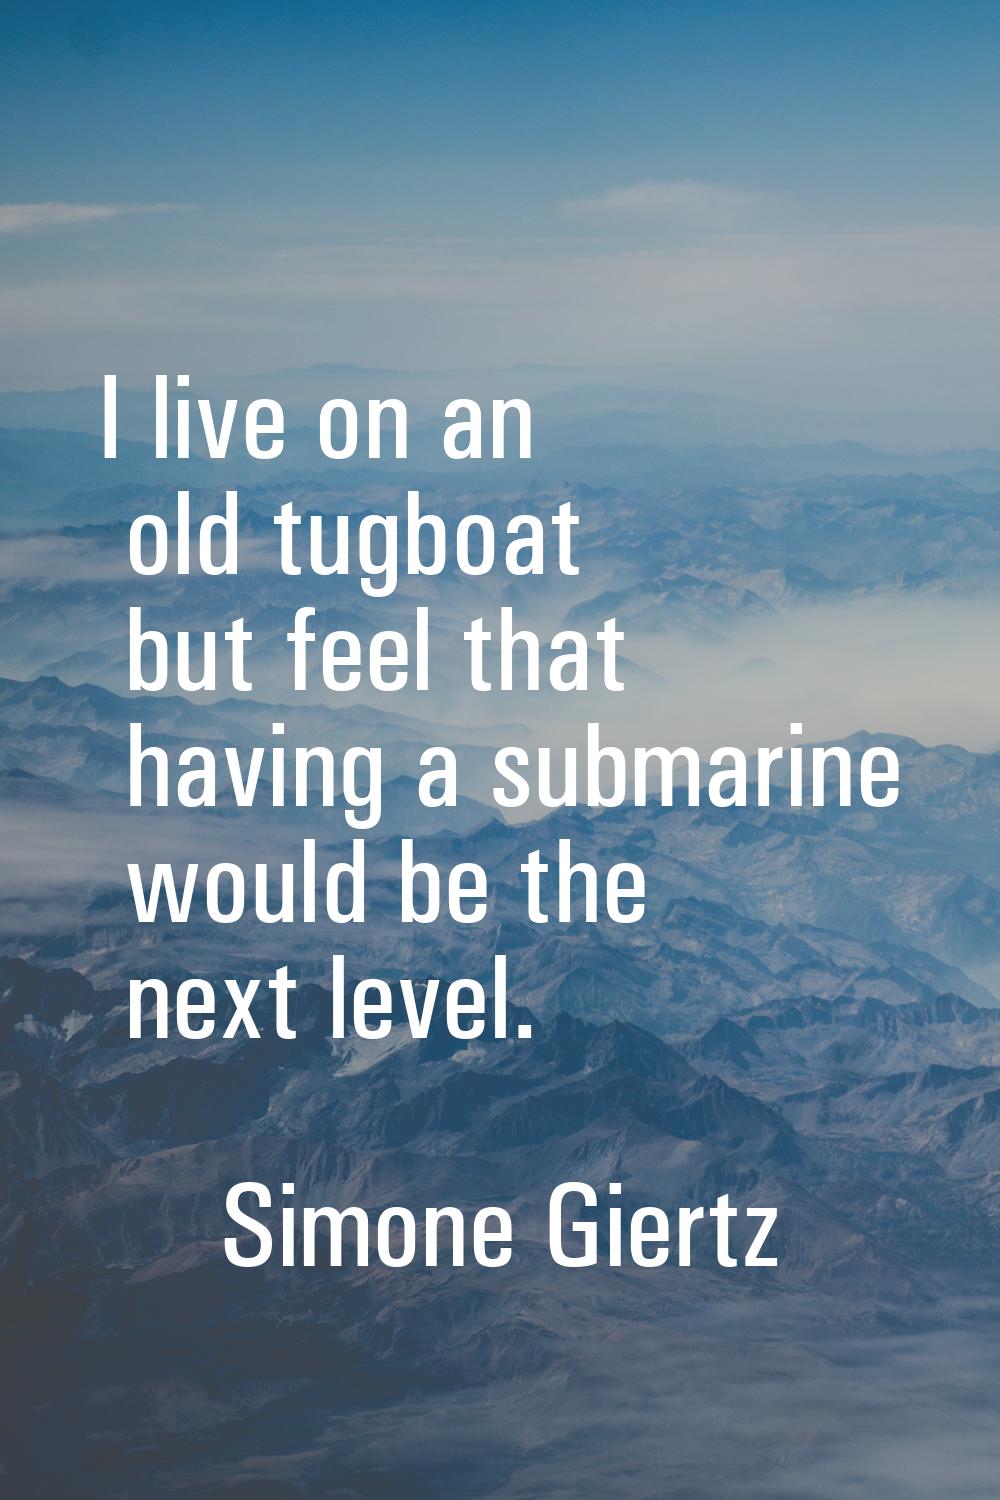 I live on an old tugboat but feel that having a submarine would be the next level.